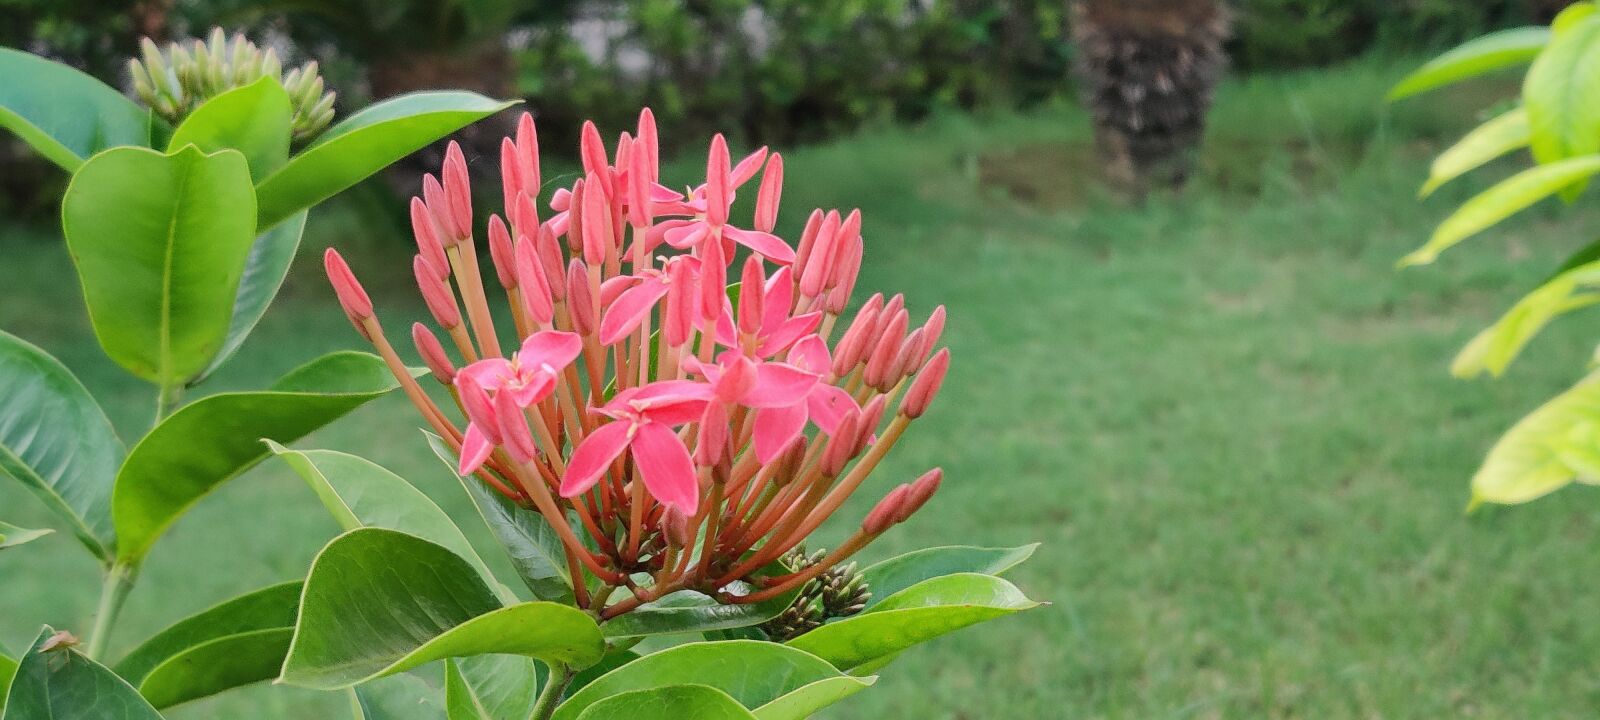 OnePlus HD1901 sample photo. Natural beauty, flowers, nature photography